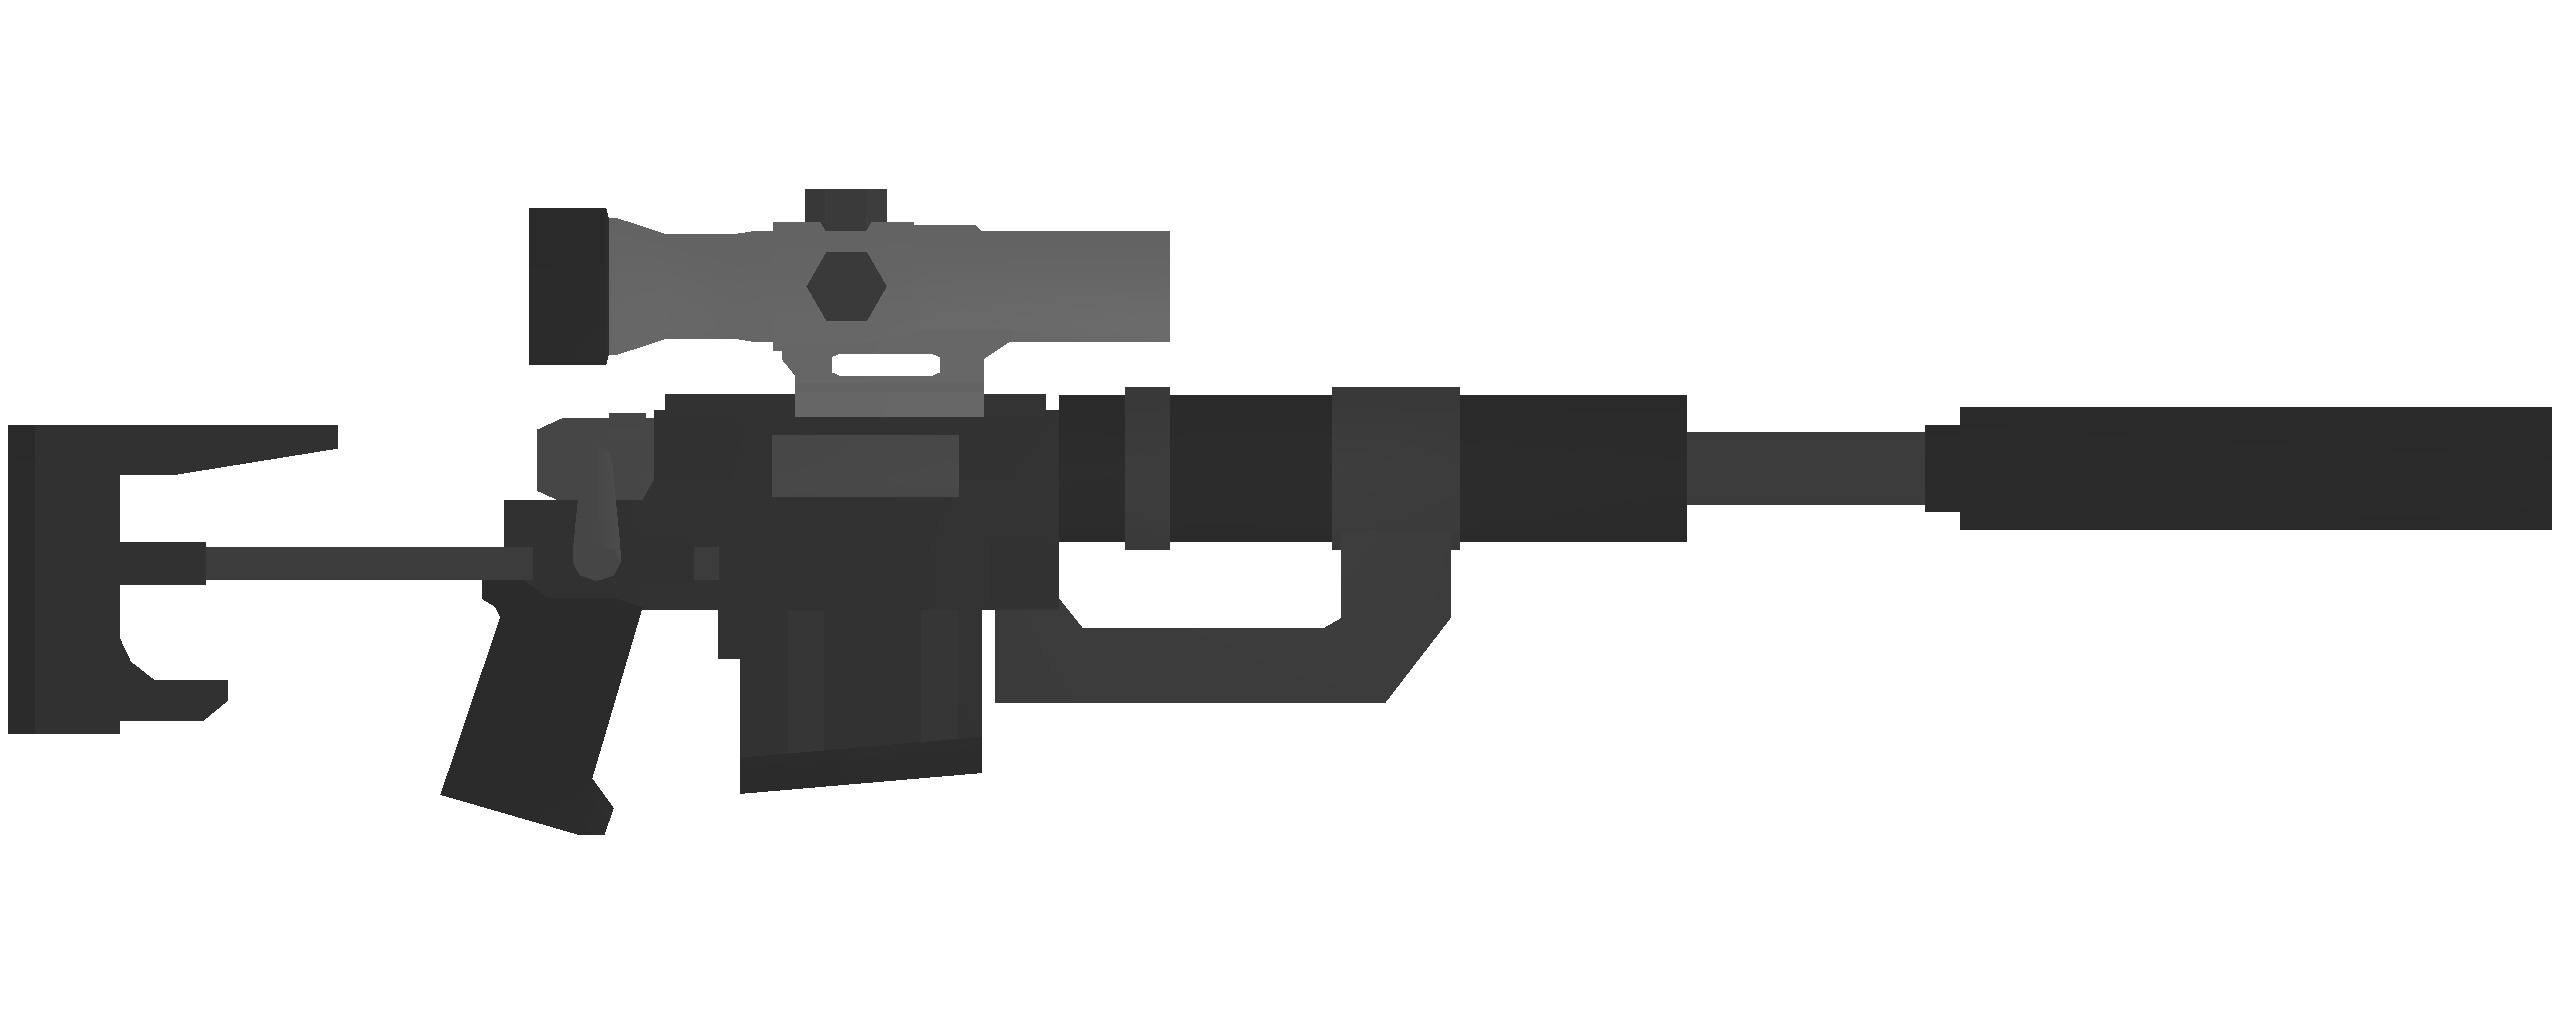 Unturned All ID lists for Magazines and Attachments - Kuwait Items Redux - Sniper Rifles - 04CDC09